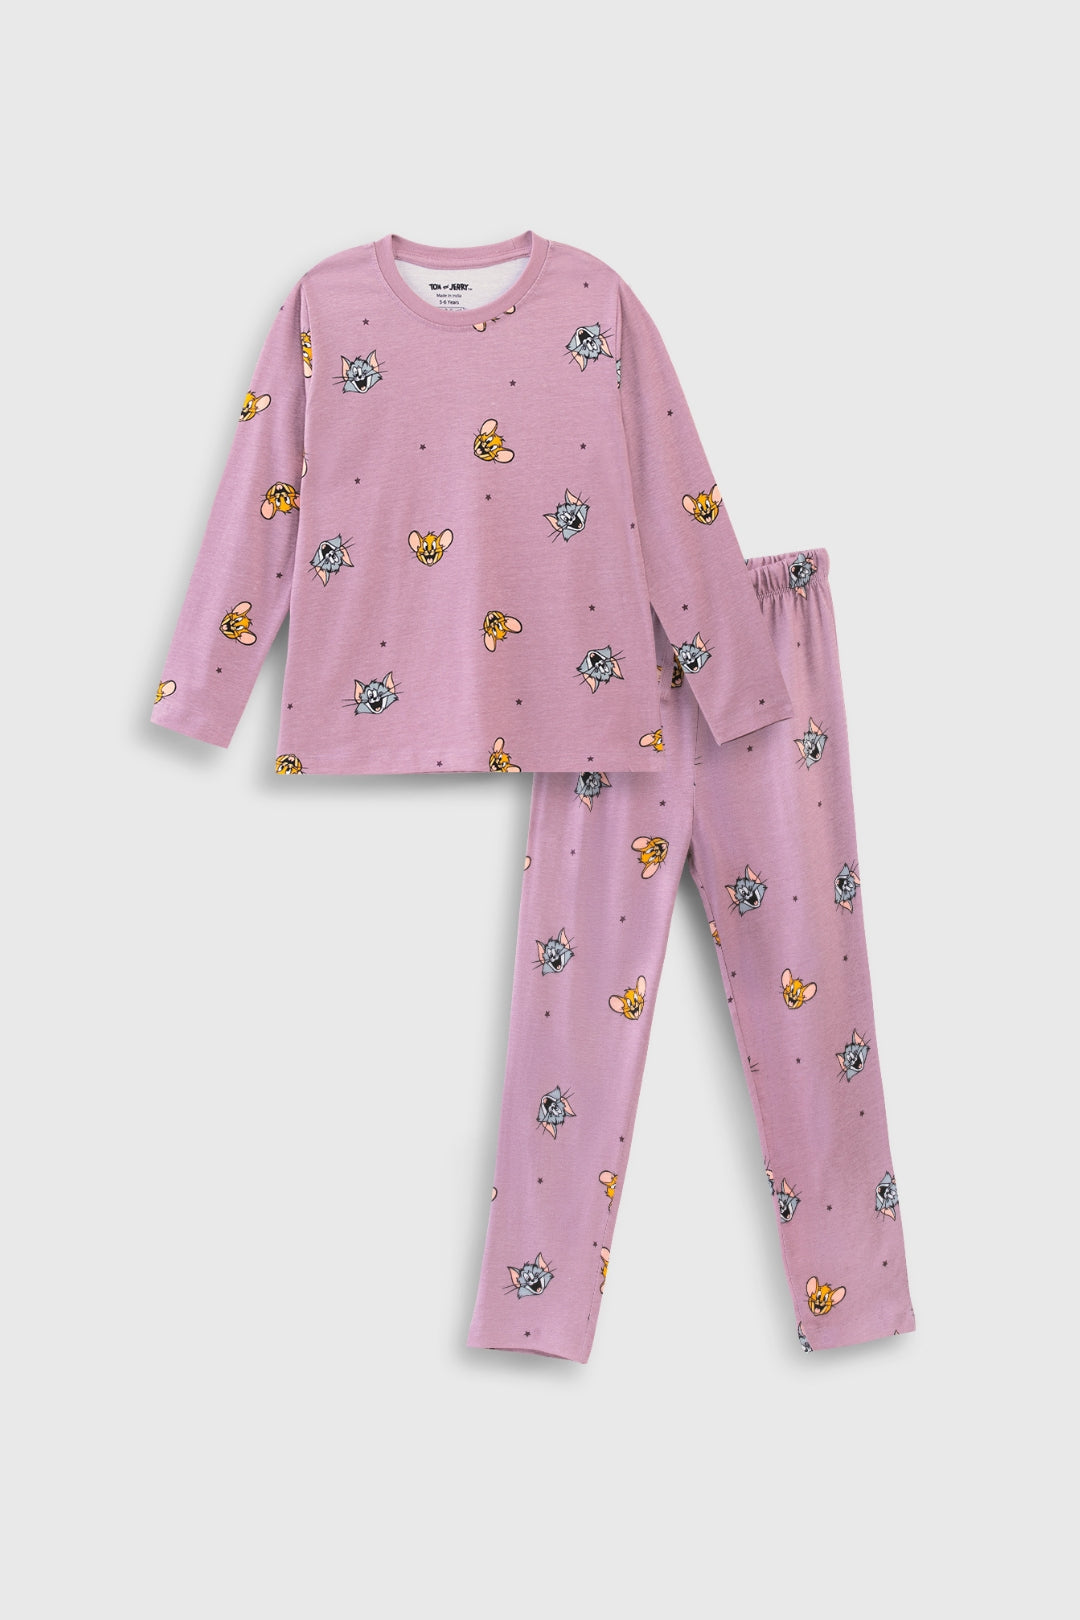 Tom and Jerry Classic Purple Pajama Set for Family